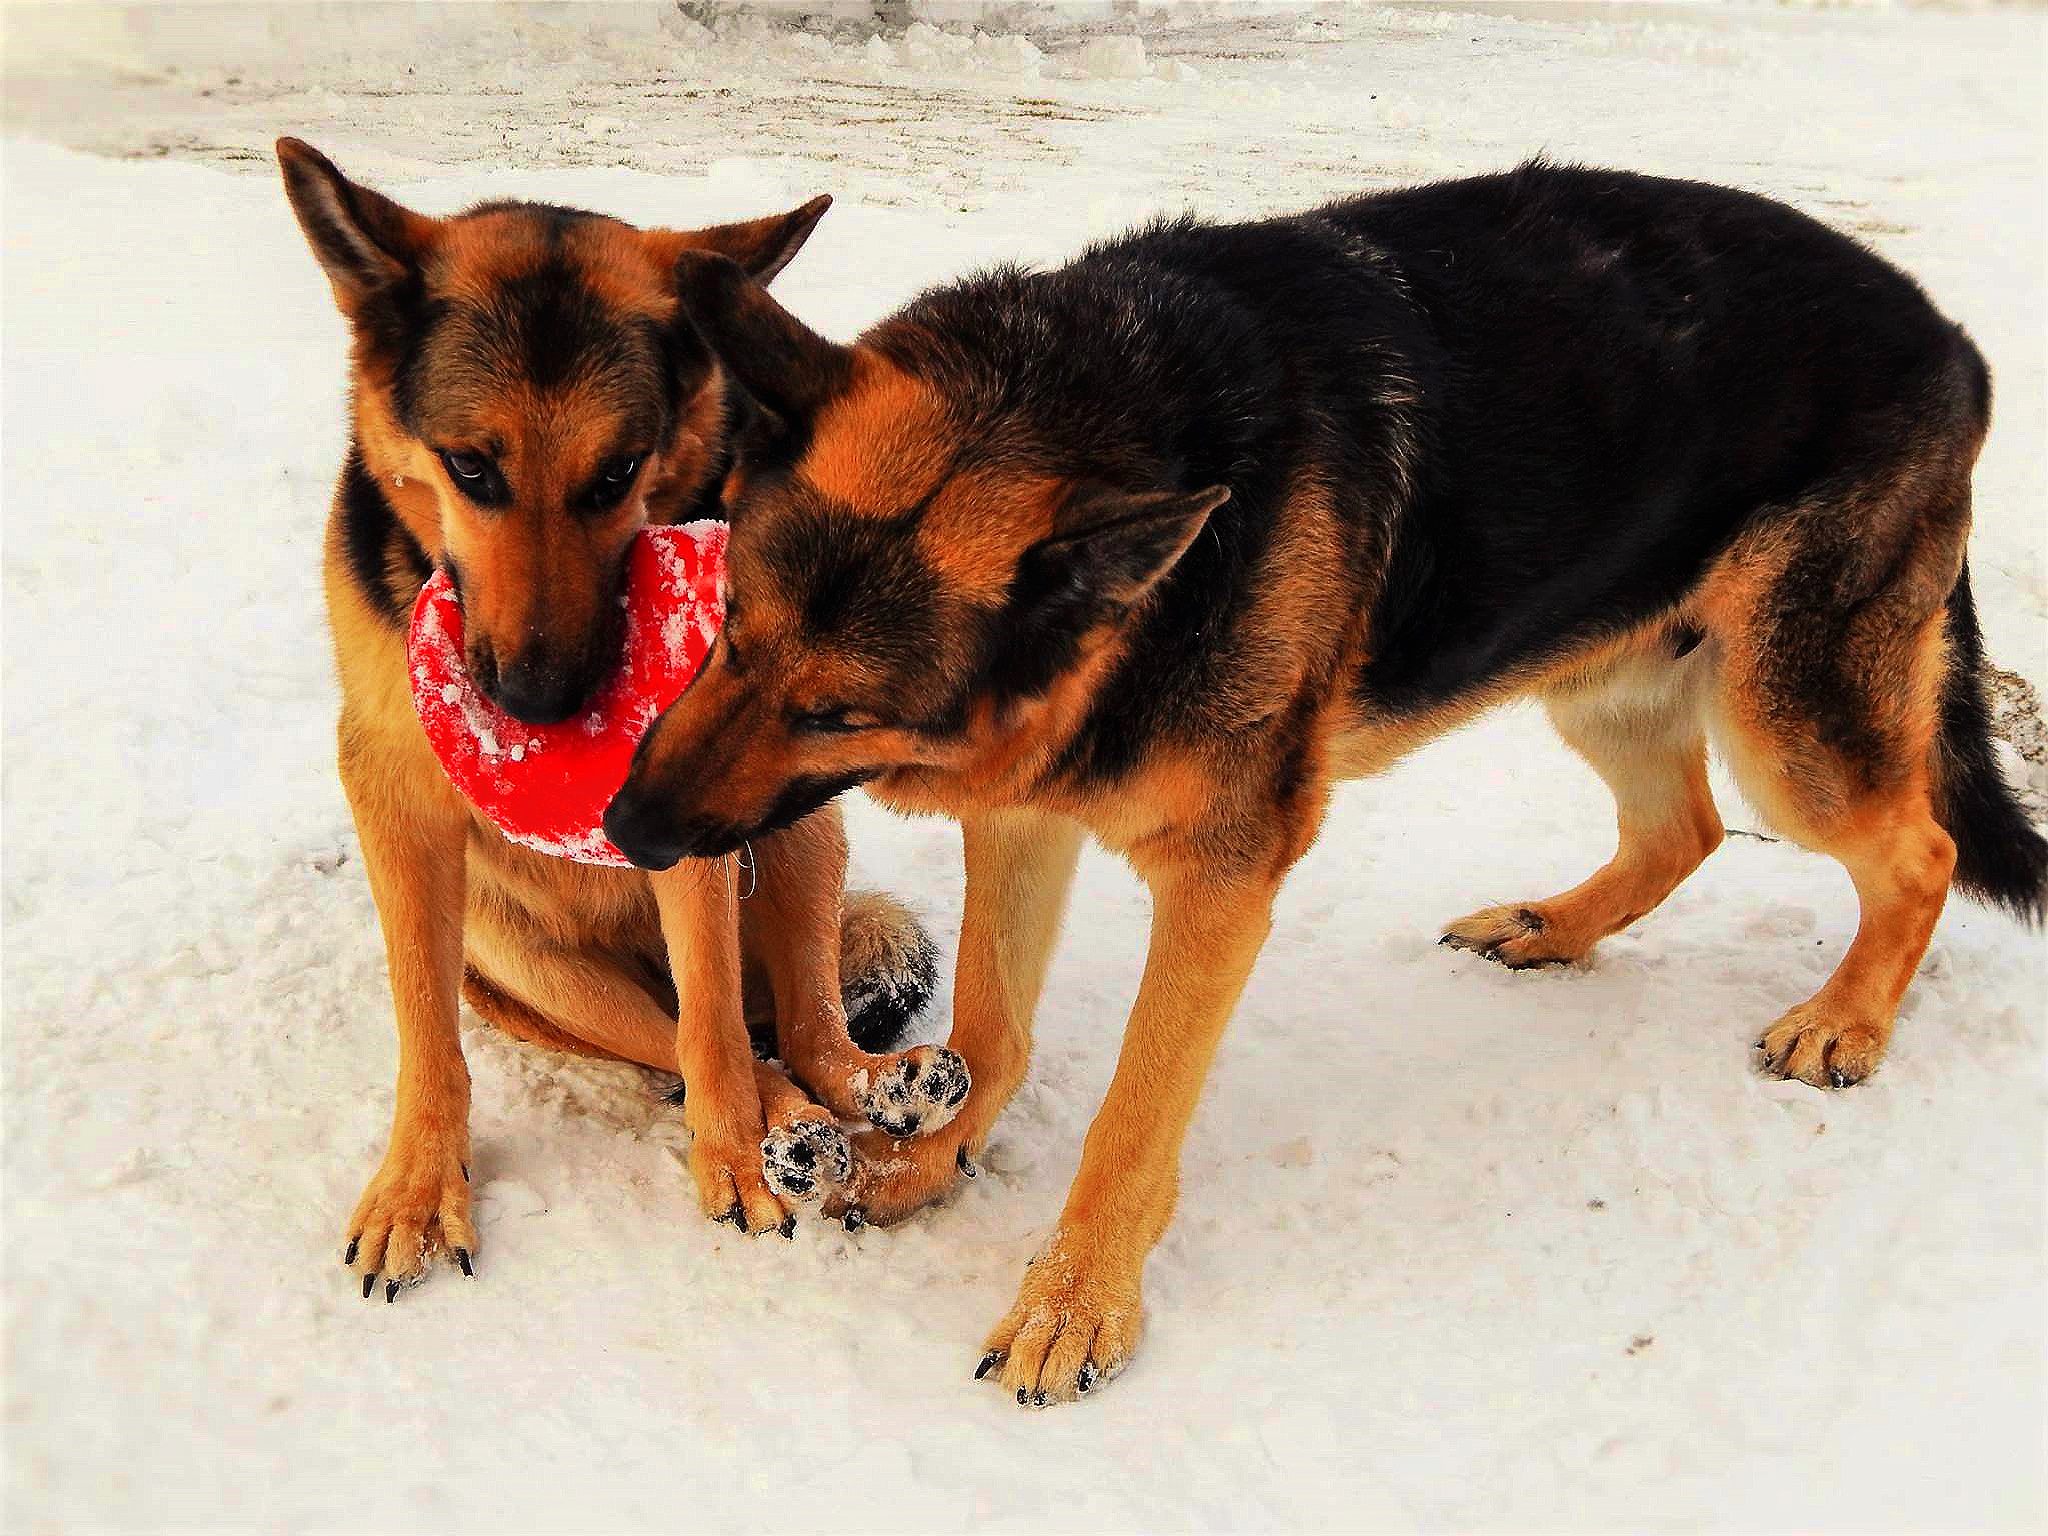 two A German Shepherd Dog sharing a chew toy while at the beach